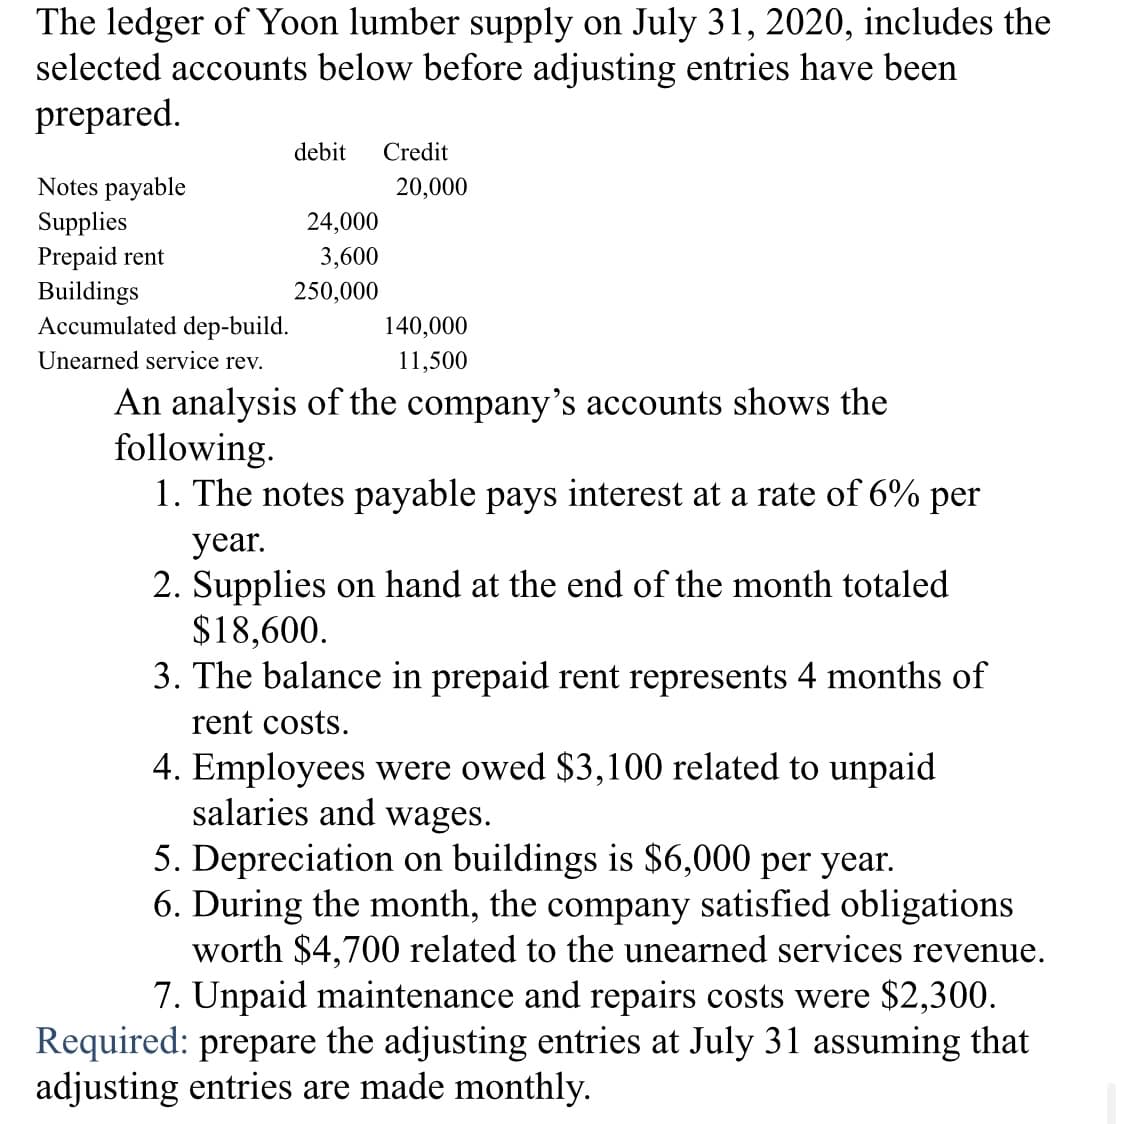 The ledger of Yoon lumber supply on July 31, 2020, includes the
selected accounts below before adjusting entries have been
prepared.
debit
Credit
Notes payable
20,000
24,000
Supplies
Prepaid rent
Buildings
Accumulated dep-build.
3,600
250,000
140,000
Unearned service rev.
11,500
An analysis of the company's accounts shows the
following.
1. The notes payable pays interest at a rate of 6% per
year.
2. Supplies on hand at the end of the month totaled
$18,600.
3. The balance in prepaid rent represents 4 months of
rent costs.
4. Employees were owed $3,100 related to unpaid
salaries and wages.
5. Depreciation on buildings is $6,000 per year.
6. During the month, the company satisfied obligations
worth $4,700 related to the unearned services revenue.
7. Unpaid maintenance and repairs costs were $2,300.
Required: prepare the adjusting entries at July 31 assuming that
adjusting entries are made monthly.
